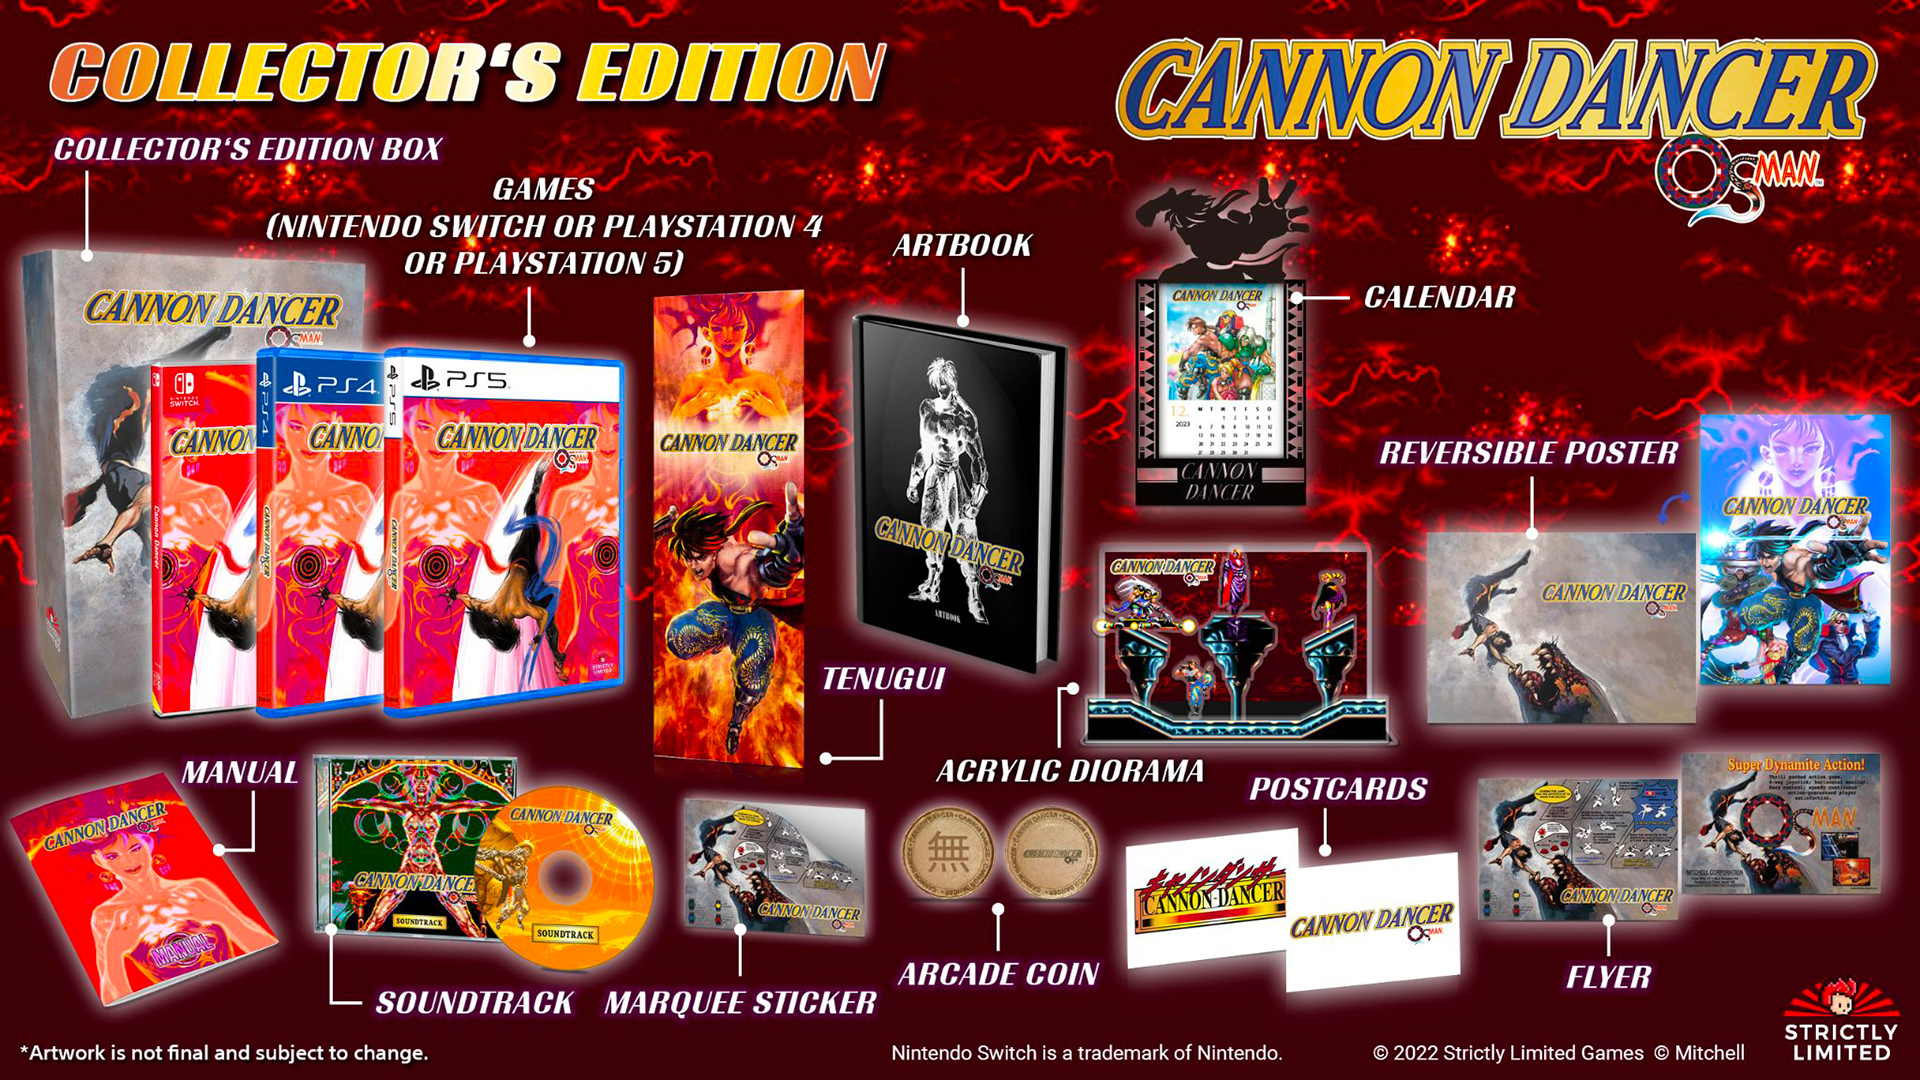 Cannon Dancer collector's edition